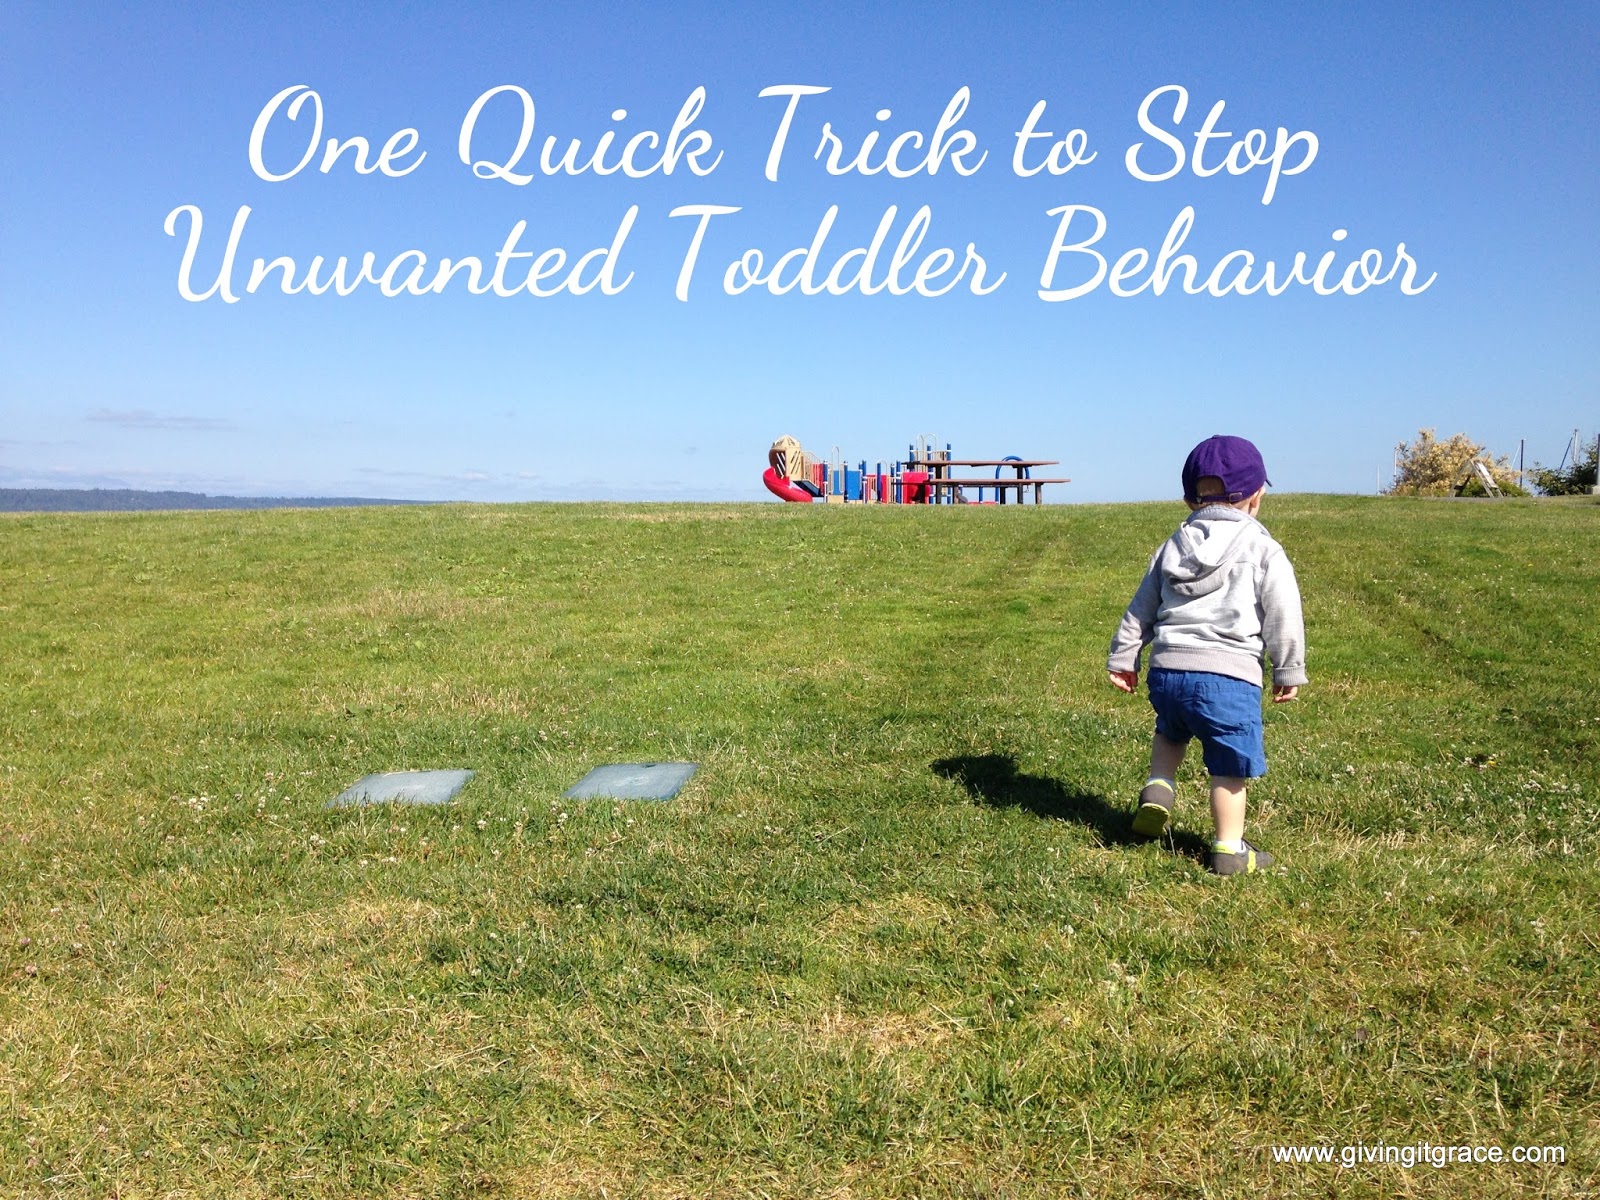 BFBN: One Quick Trip to Stop Unwanted Toddler Behavior